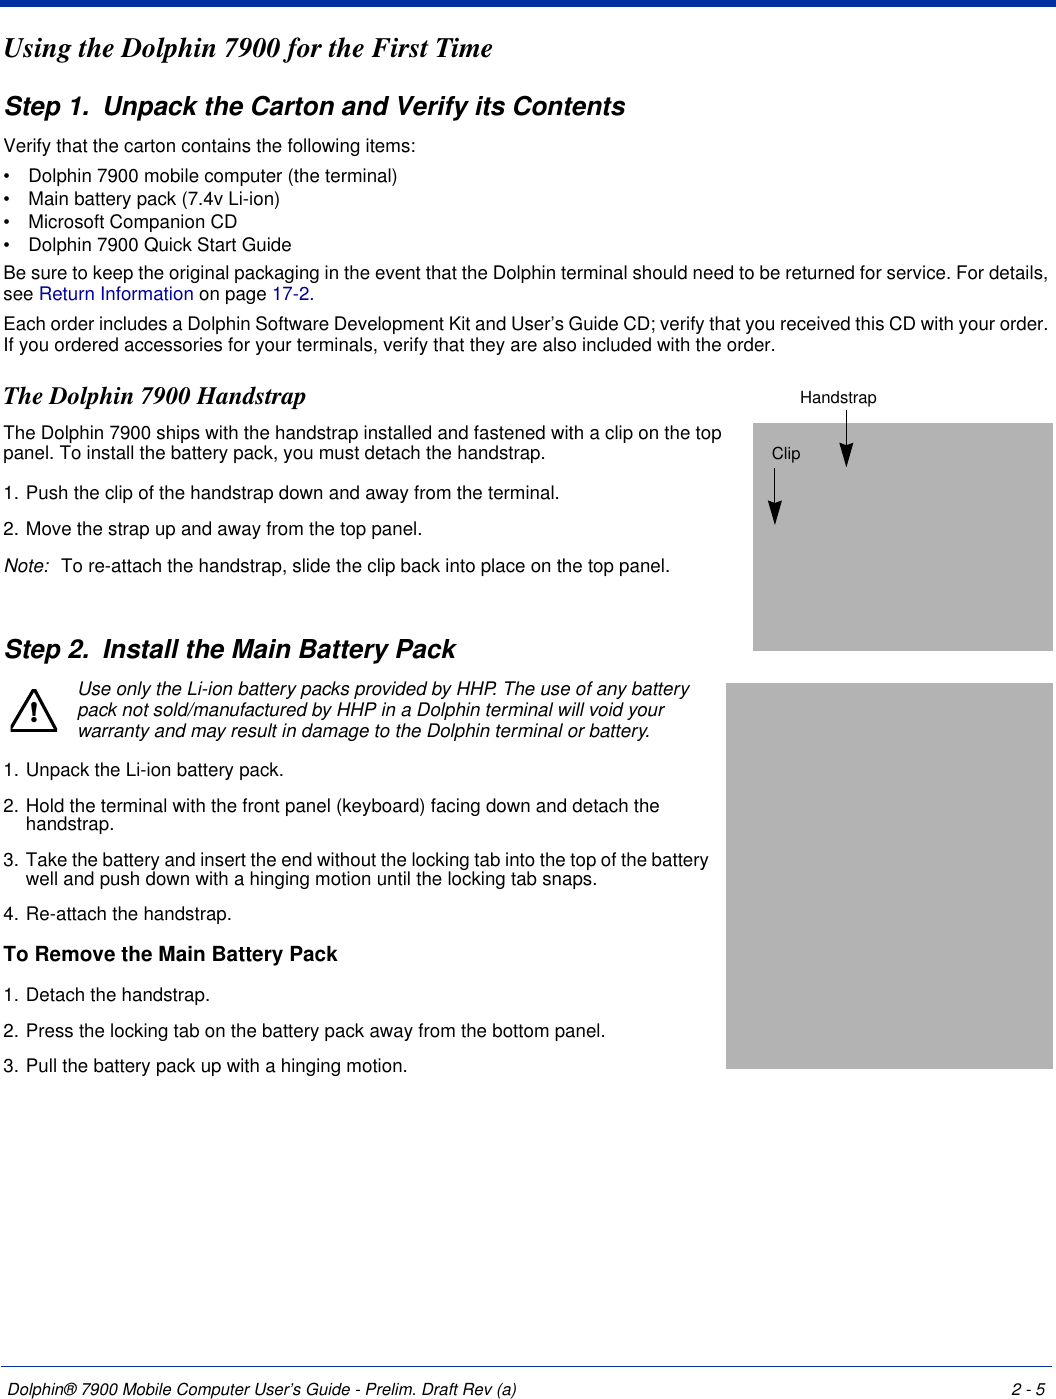 Dolphin® 7900 Mobile Computer User’s Guide - Prelim. Draft Rev (a) 2 - 5Using the Dolphin 7900 for the First TimeStep 1. Unpack the Carton and Verify its ContentsVerify that the carton contains the following items: •           Dolphin 7900 mobile computer (the terminal)•           Main battery pack (7.4v Li-ion)•           Microsoft Companion CD•           Dolphin 7900 Quick Start GuideBe sure to keep the original packaging in the event that the Dolphin terminal should need to be returned for service. For details, see Return Information on page 17-2. Each order includes a Dolphin Software Development Kit and User’s Guide CD; verify that you received this CD with your order. If you ordered accessories for your terminals, verify that they are also included with the order.The Dolphin 7900 HandstrapThe Dolphin 7900 ships with the handstrap installed and fastened with a clip on the top panel. To install the battery pack, you must detach the handstrap.1. Push the clip of the handstrap down and away from the terminal. 2. Move the strap up and away from the top panel.Note: To re-attach the handstrap, slide the clip back into place on the top panel.Step 2. Install the Main Battery PackUse only the Li-ion battery packs provided by HHP. The use of any battery pack not sold/manufactured by HHP in a Dolphin terminal will void your warranty and may result in damage to the Dolphin terminal or battery. 1. Unpack the Li-ion battery pack. 2. Hold the terminal with the front panel (keyboard) facing down and detach the handstrap.3. Take the battery and insert the end without the locking tab into the top of the battery well and push down with a hinging motion until the locking tab snaps. 4. Re-attach the handstrap. To Remove the Main Battery Pack 1. Detach the handstrap.2. Press the locking tab on the battery pack away from the bottom panel.3. Pull the battery pack up with a hinging motion.ClipHandstrap!